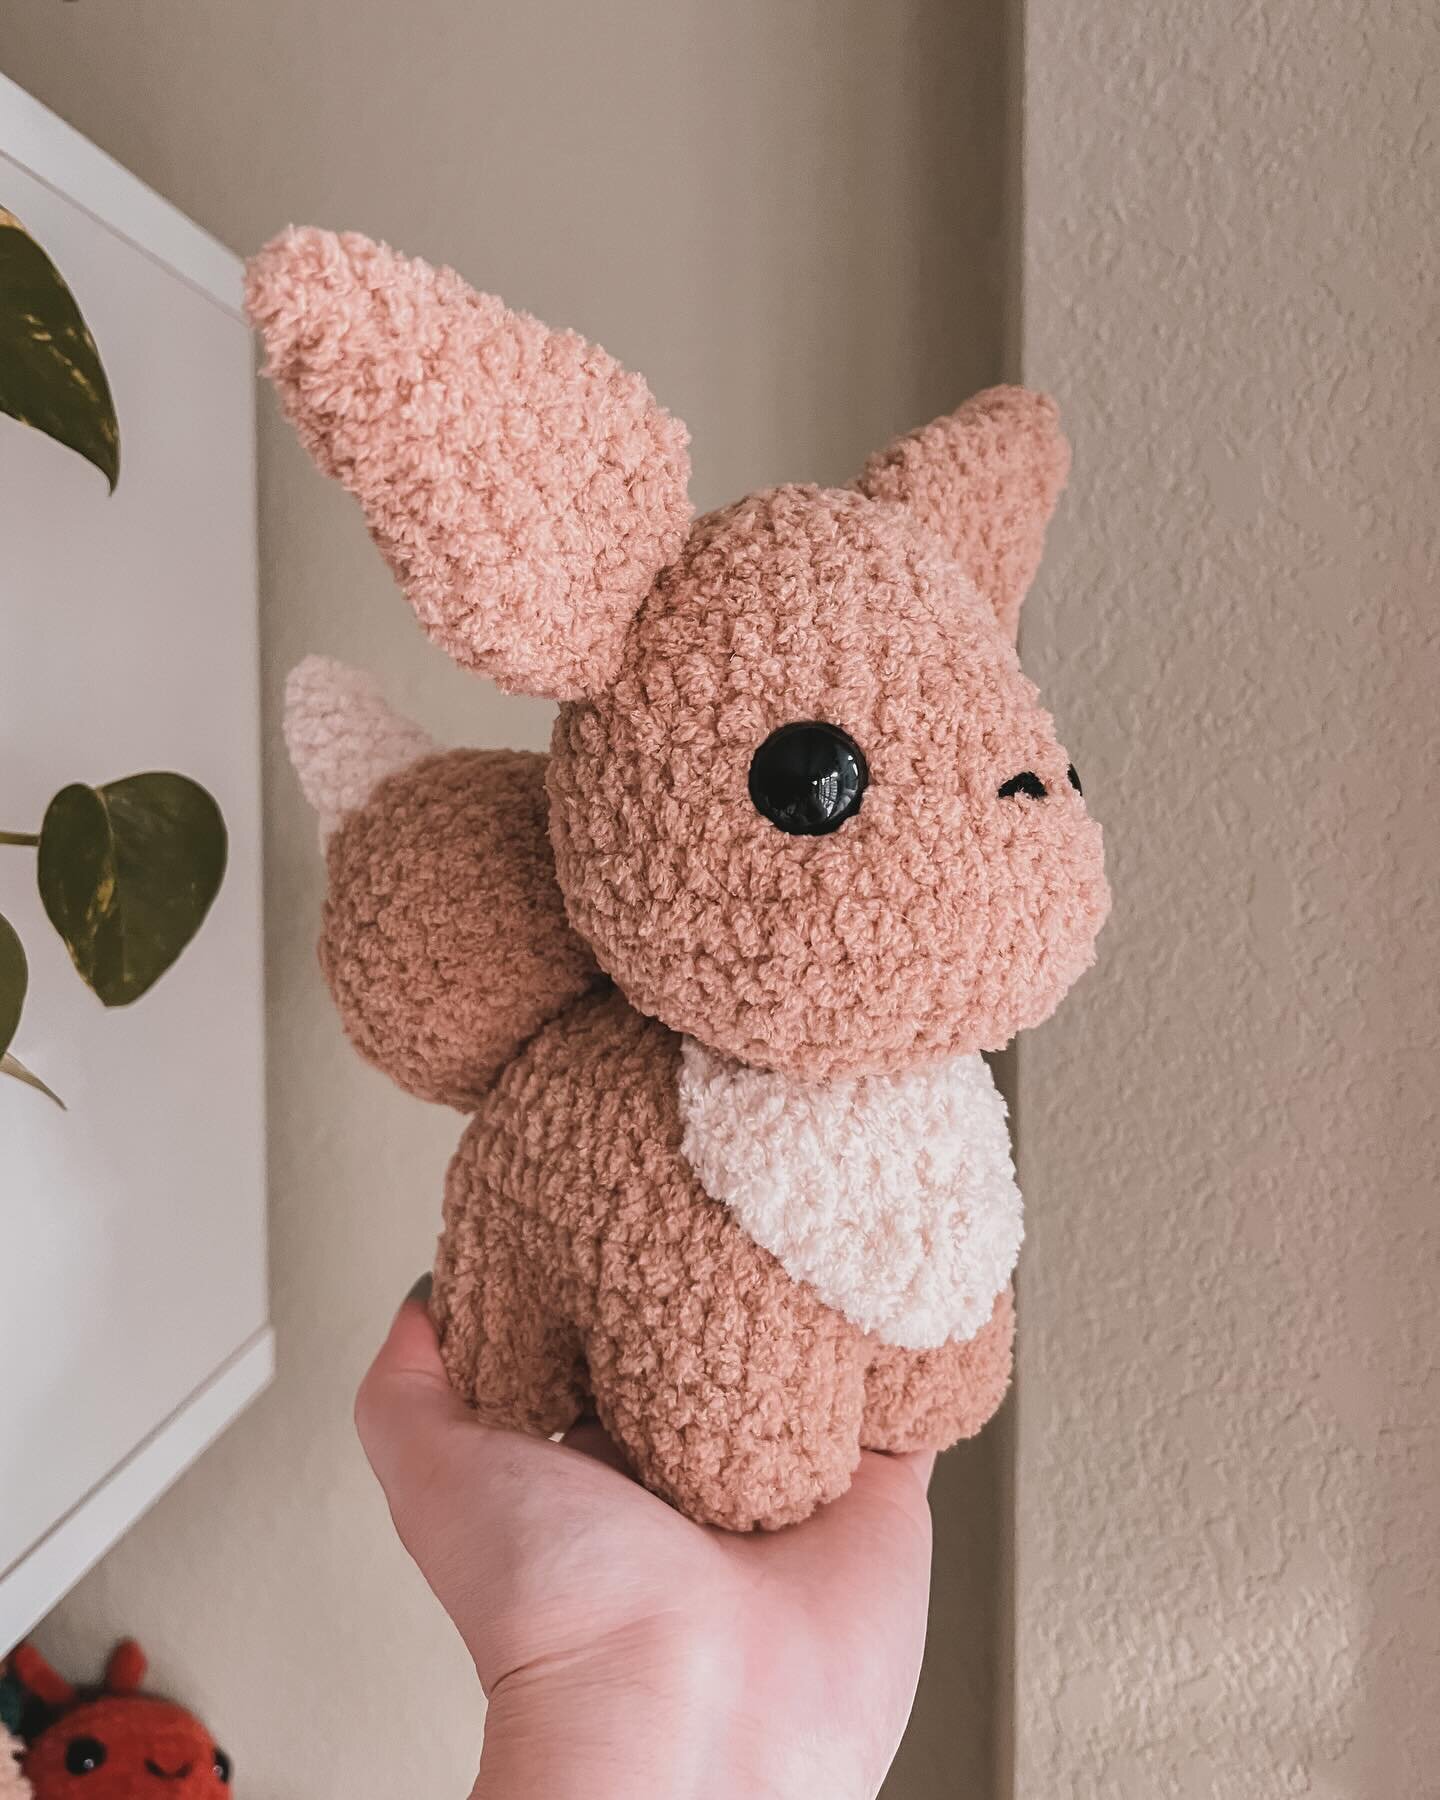 Eevee ⚡️✨💫
This little guy was just fully released by @redmills_crochet and I had the honor of testing him 🥰
Growing up surrounded by boys I was practically forced to like Pok&eacute;mon so of COURSE the adorable fluffy fox was my absolute favorite